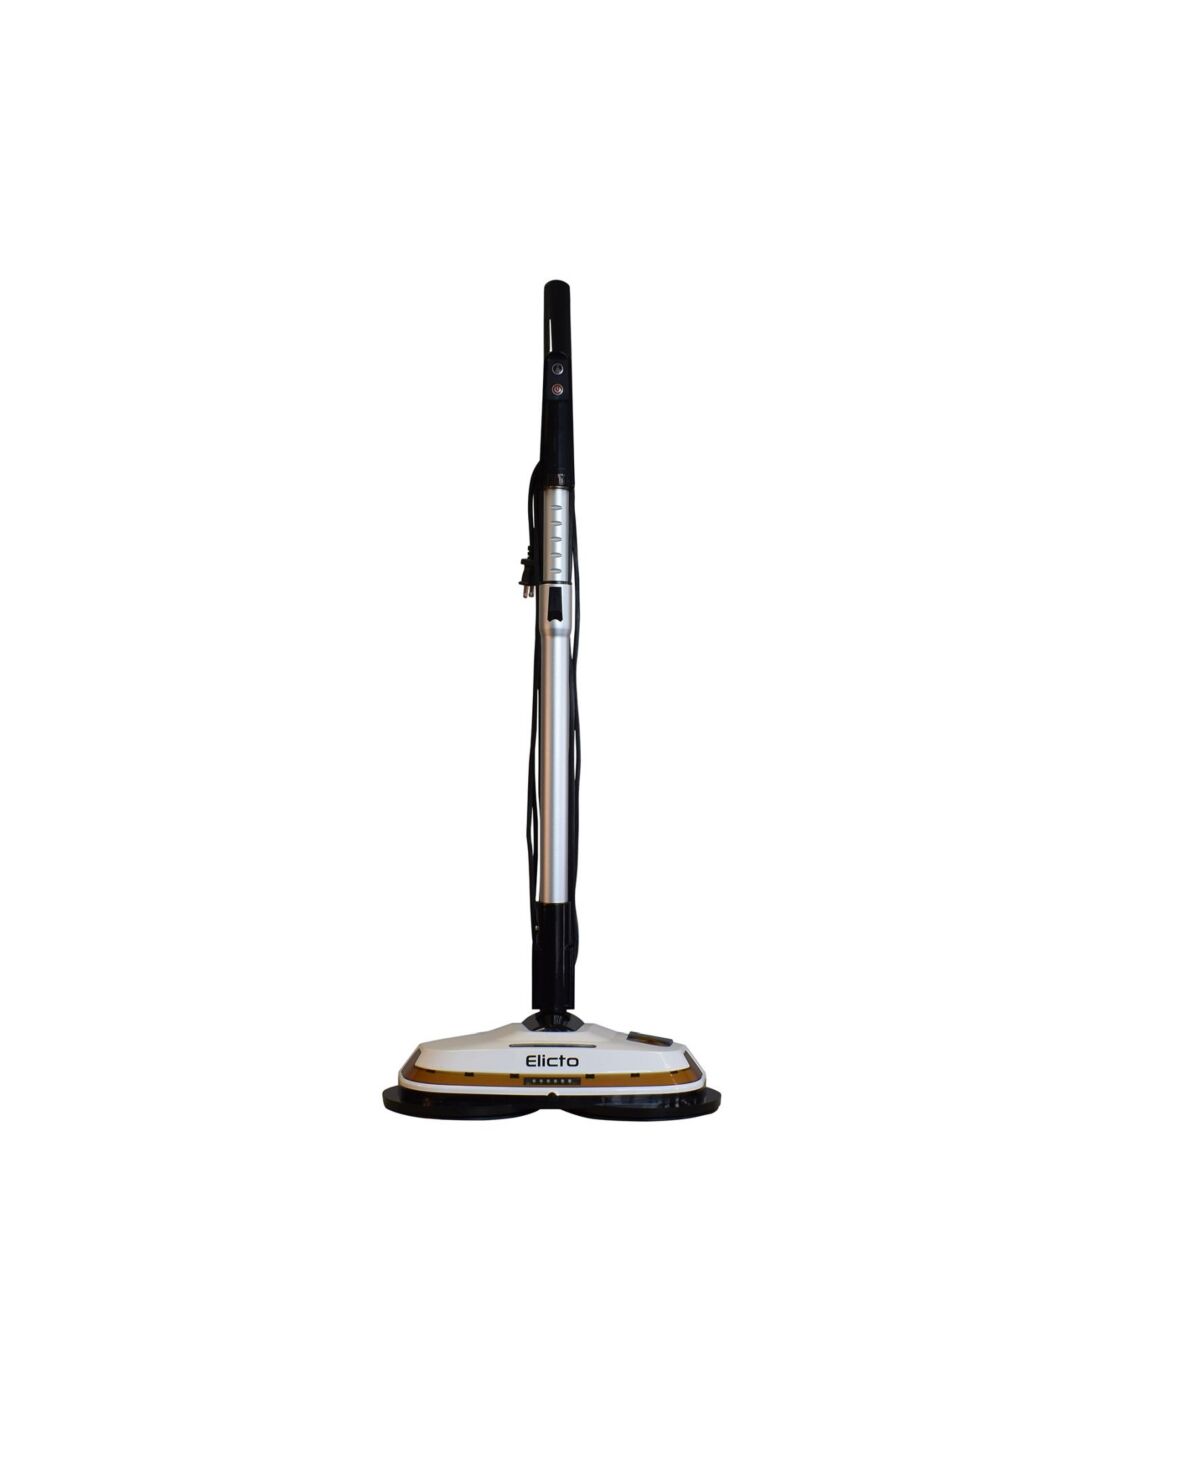 Elicto Electronic Corded Spin Mop and Polisher - White